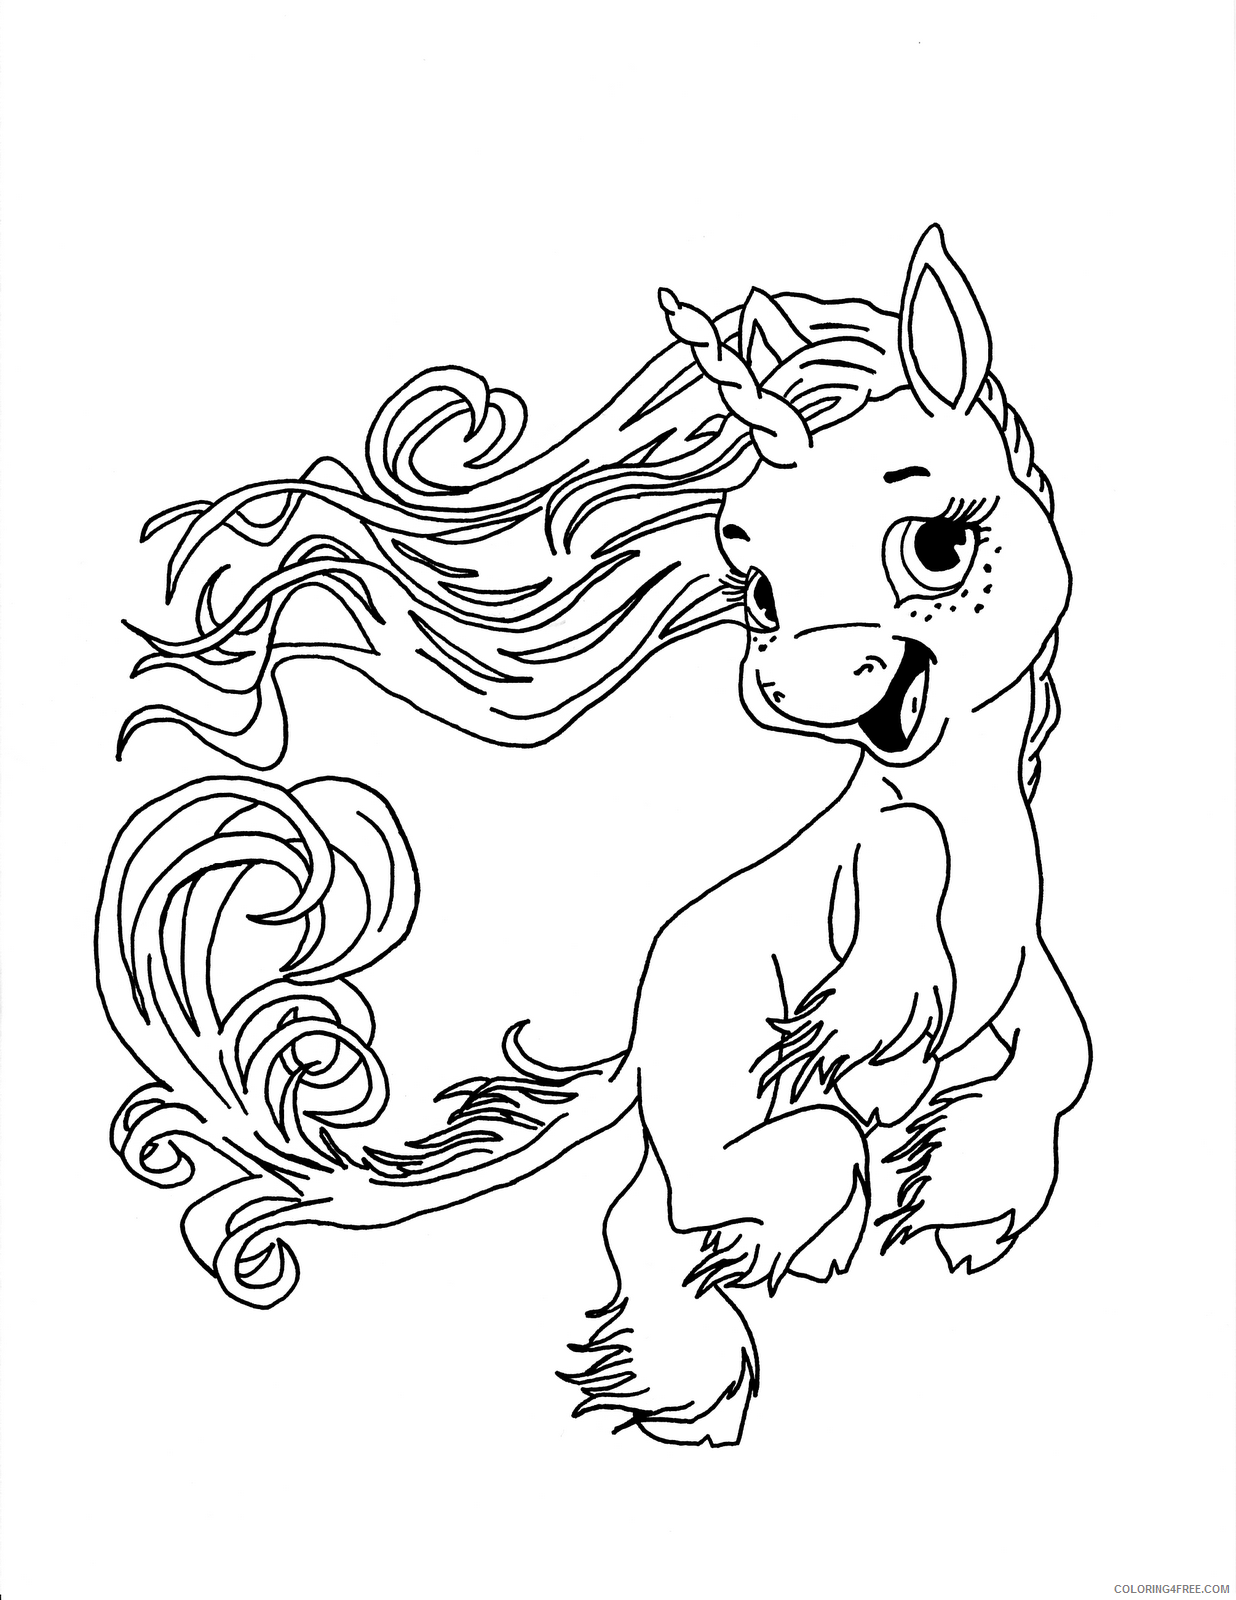 baby unicorn coloring pages for kids Coloring4free